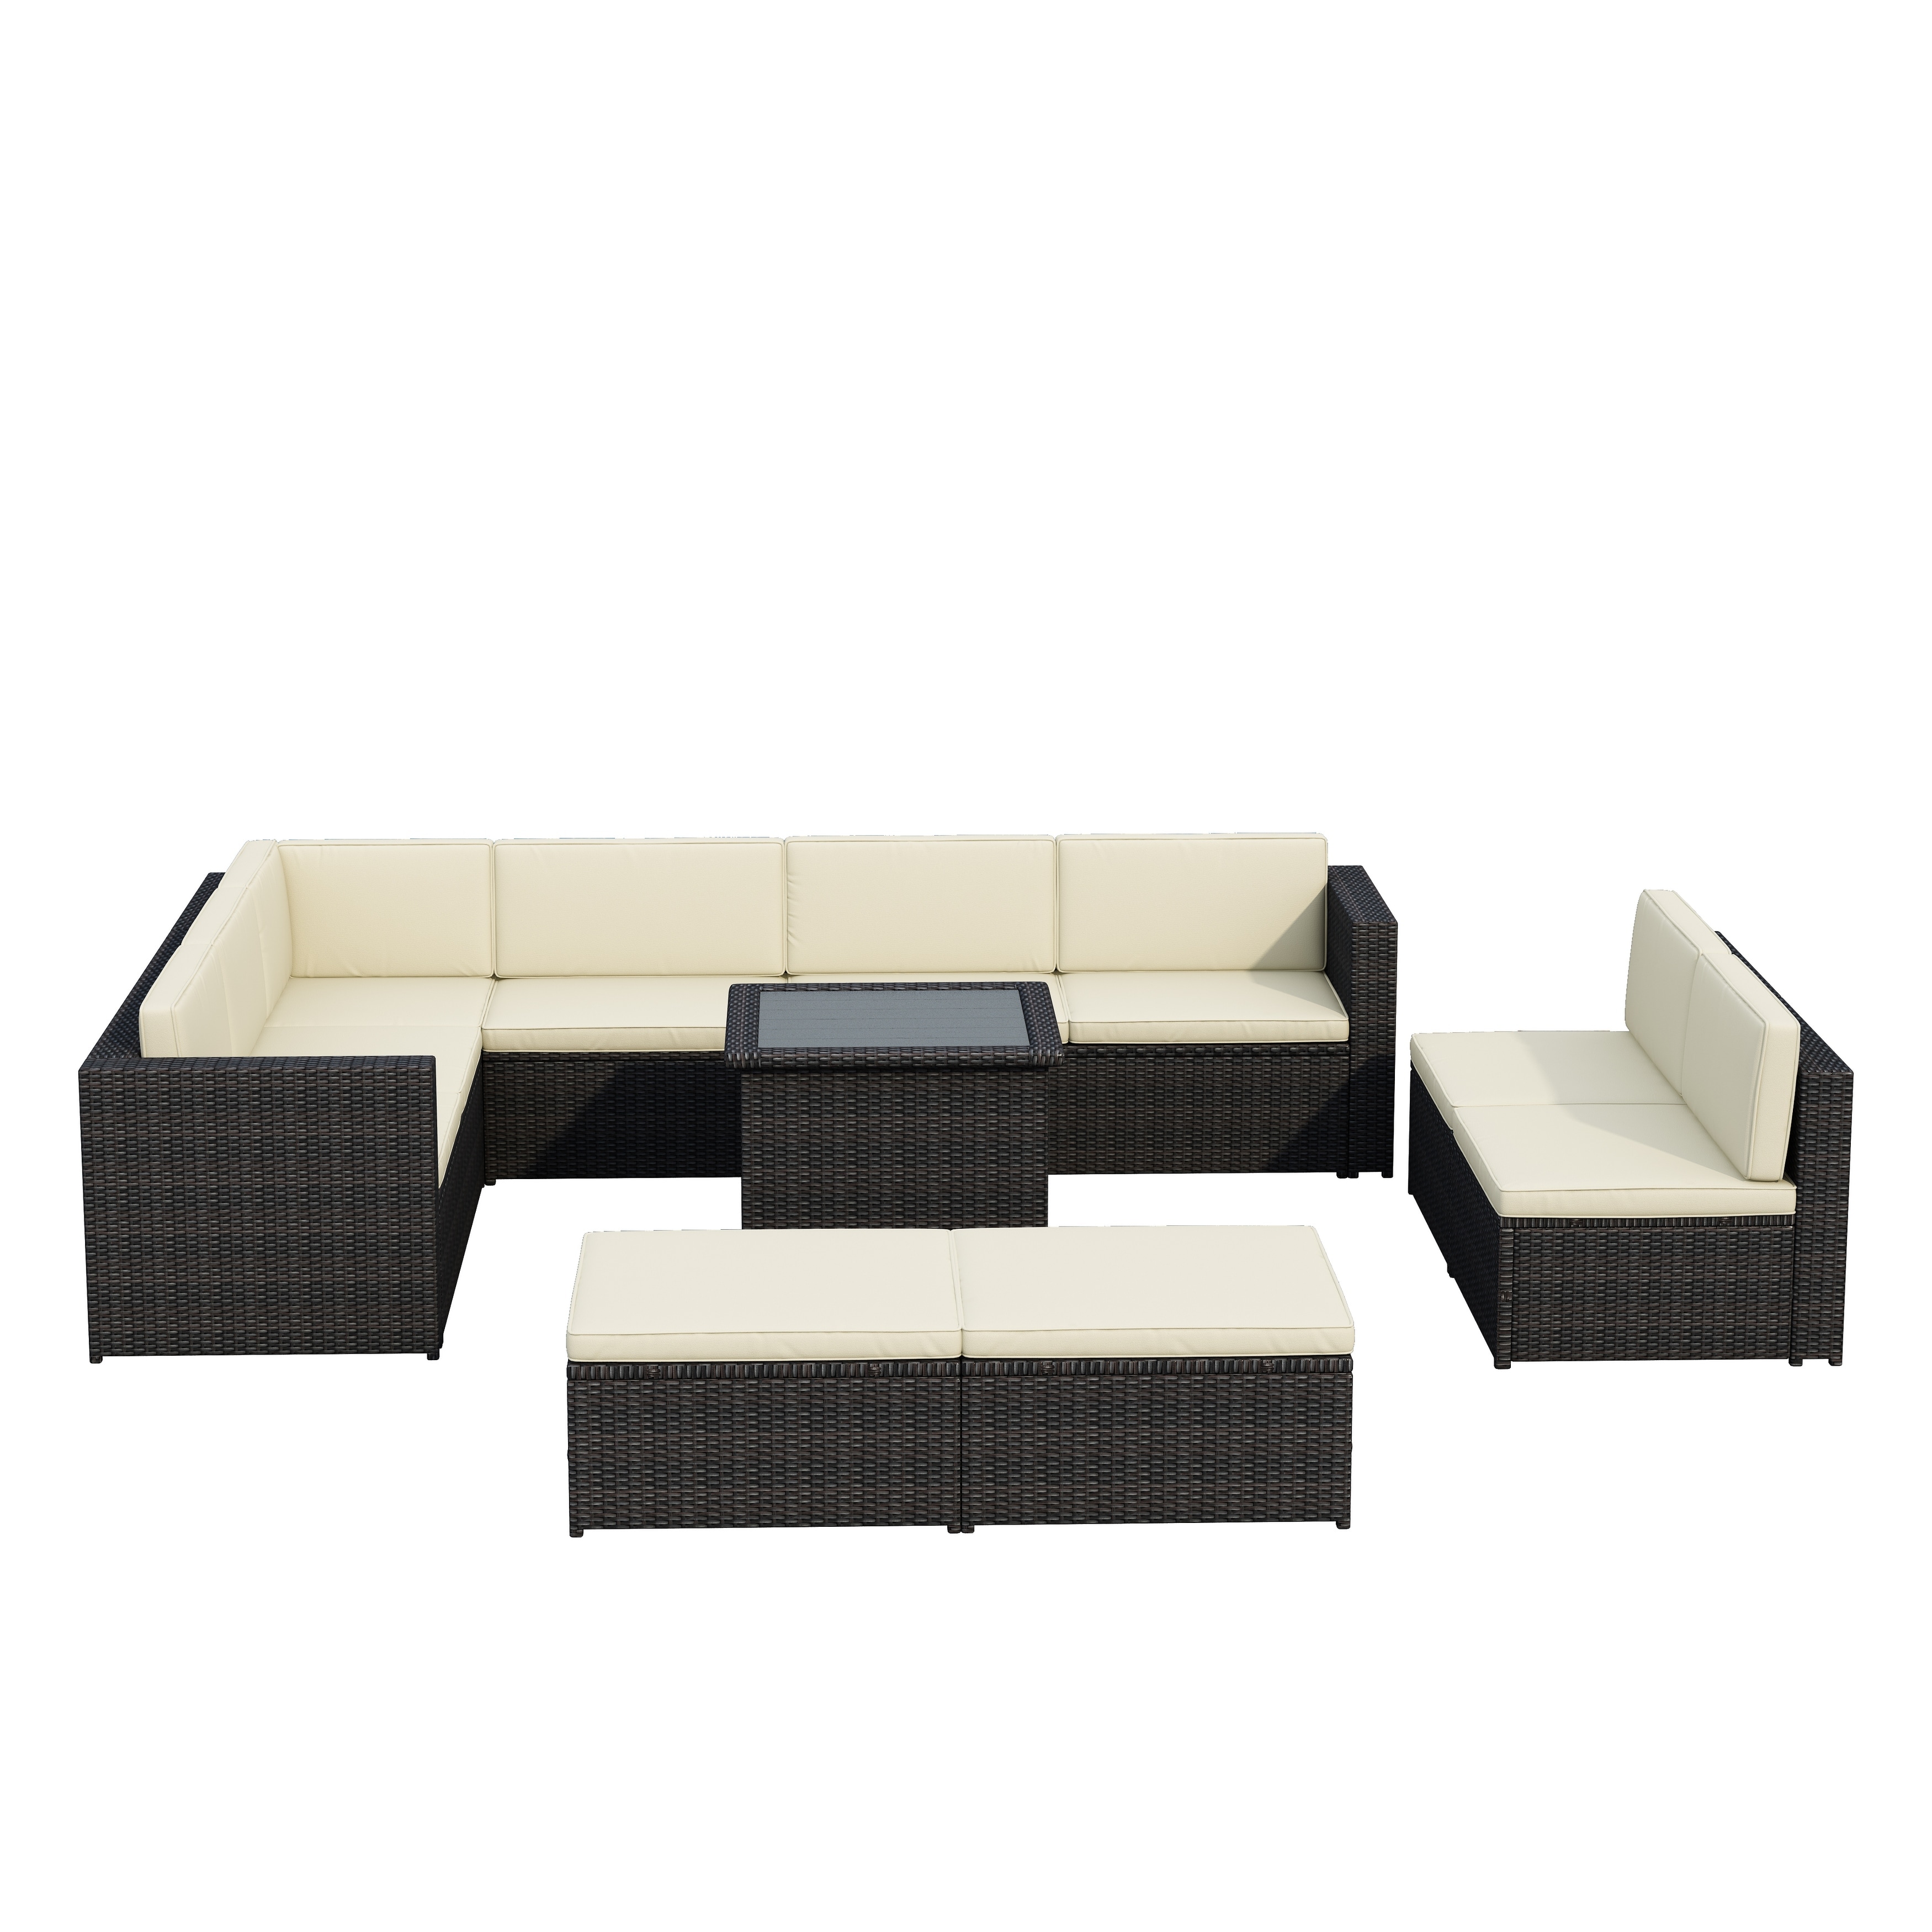 9 Piece Outdoor Sofa Set With Sectional Sofa single Chair table And Ottoman